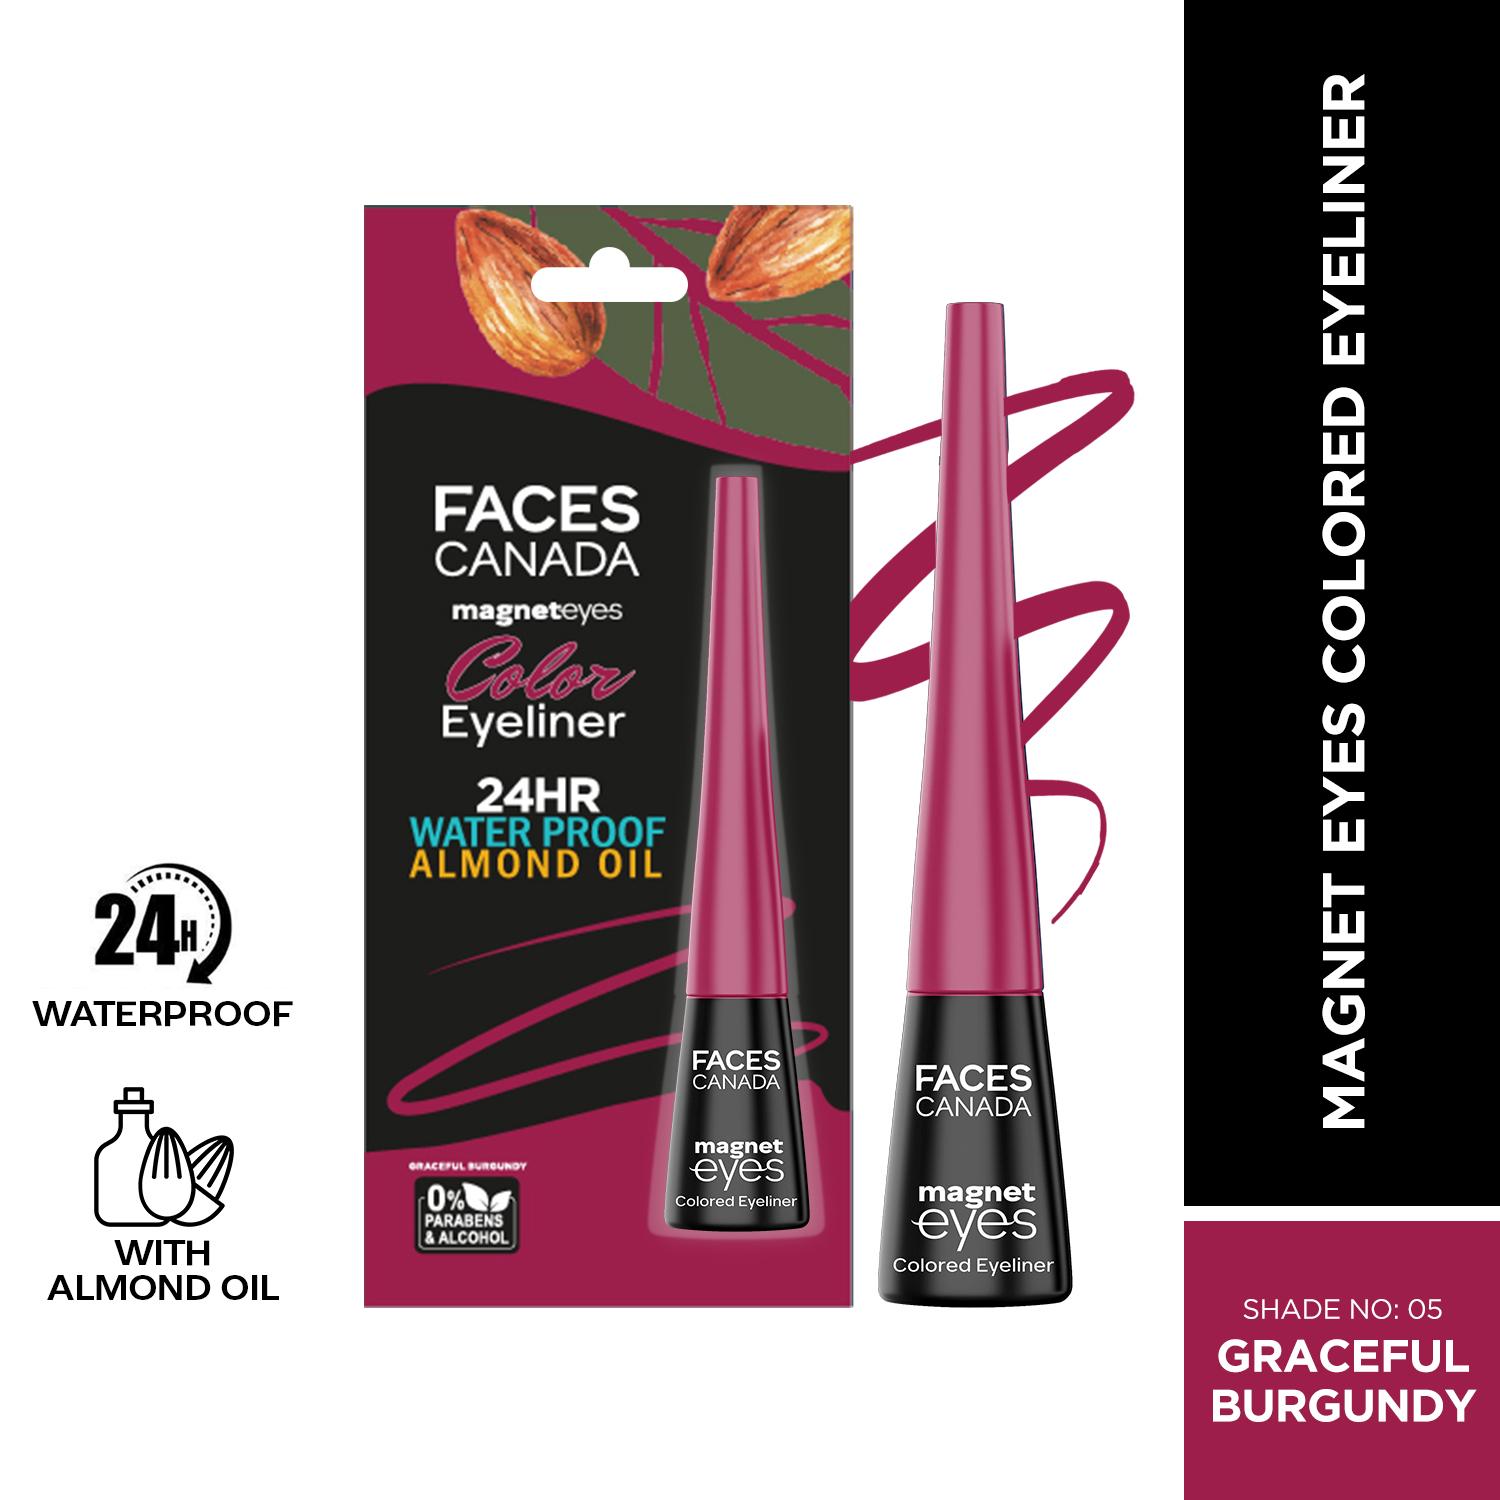 Faces Canada | Faces Canada Magneteyes Color Eyeliner - Graceful Burgundy, Glossy Finish, 24HR Long-lasting (4 ml)